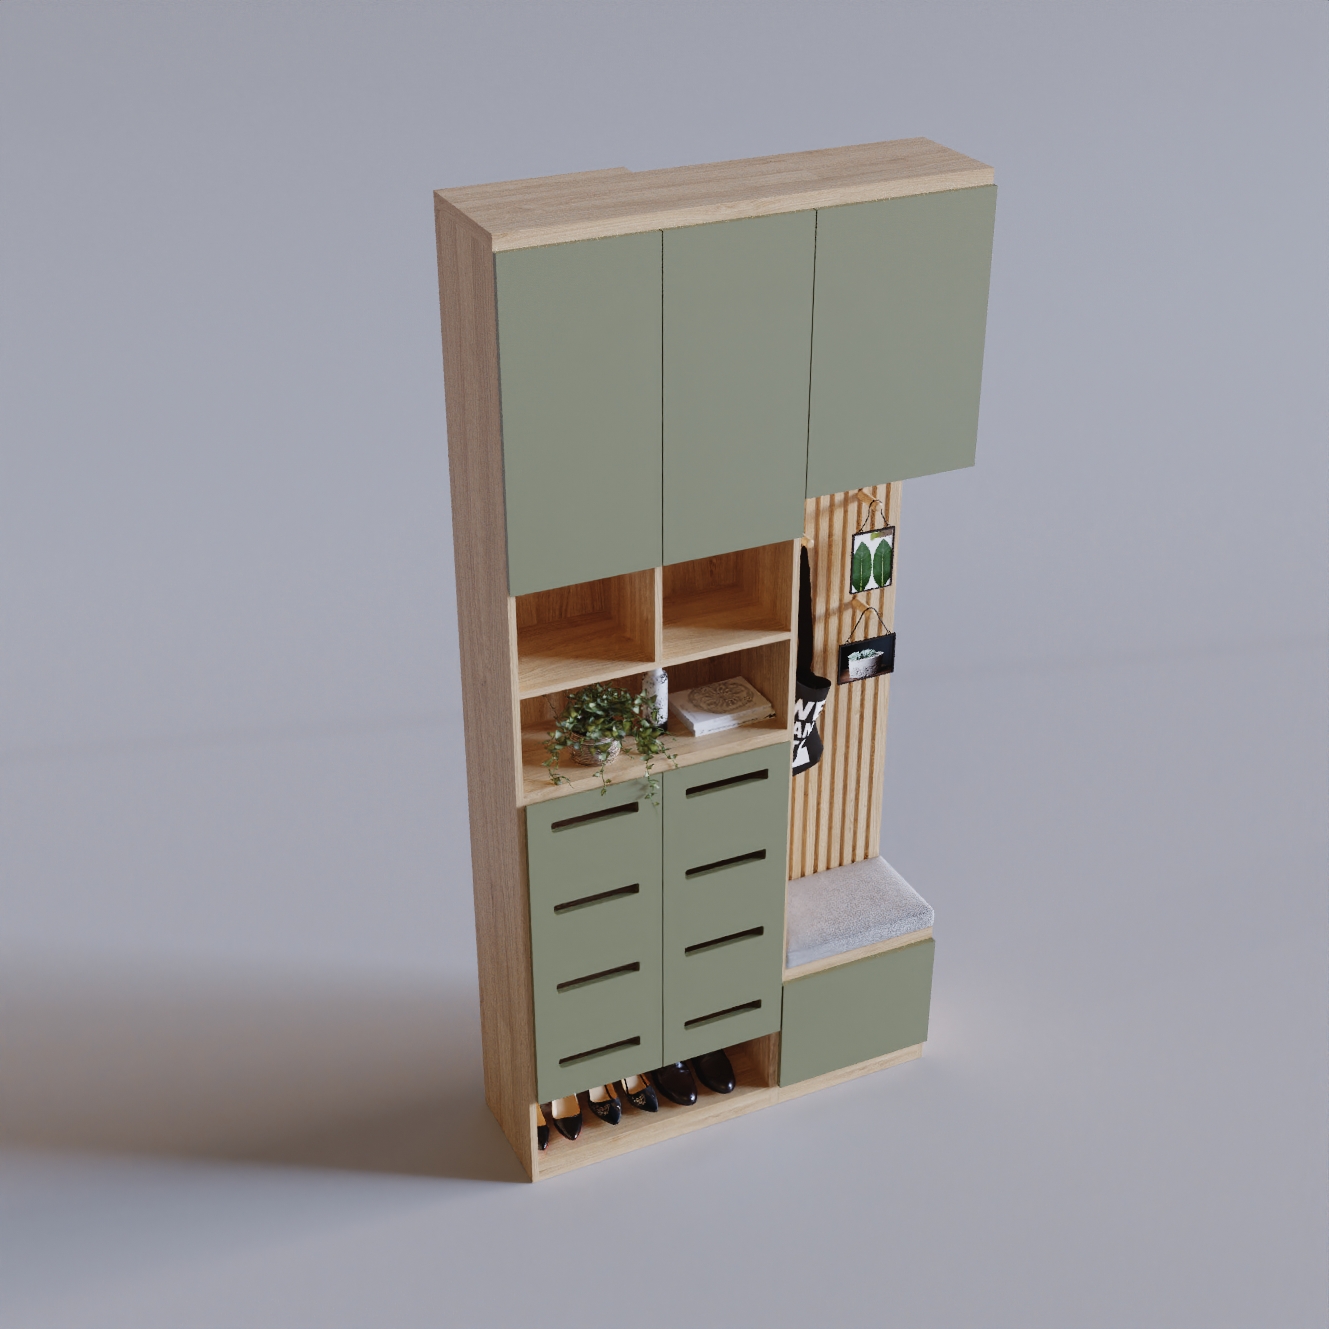 12301. Download Free Shoe Cabinet Model By Hoan Phuc